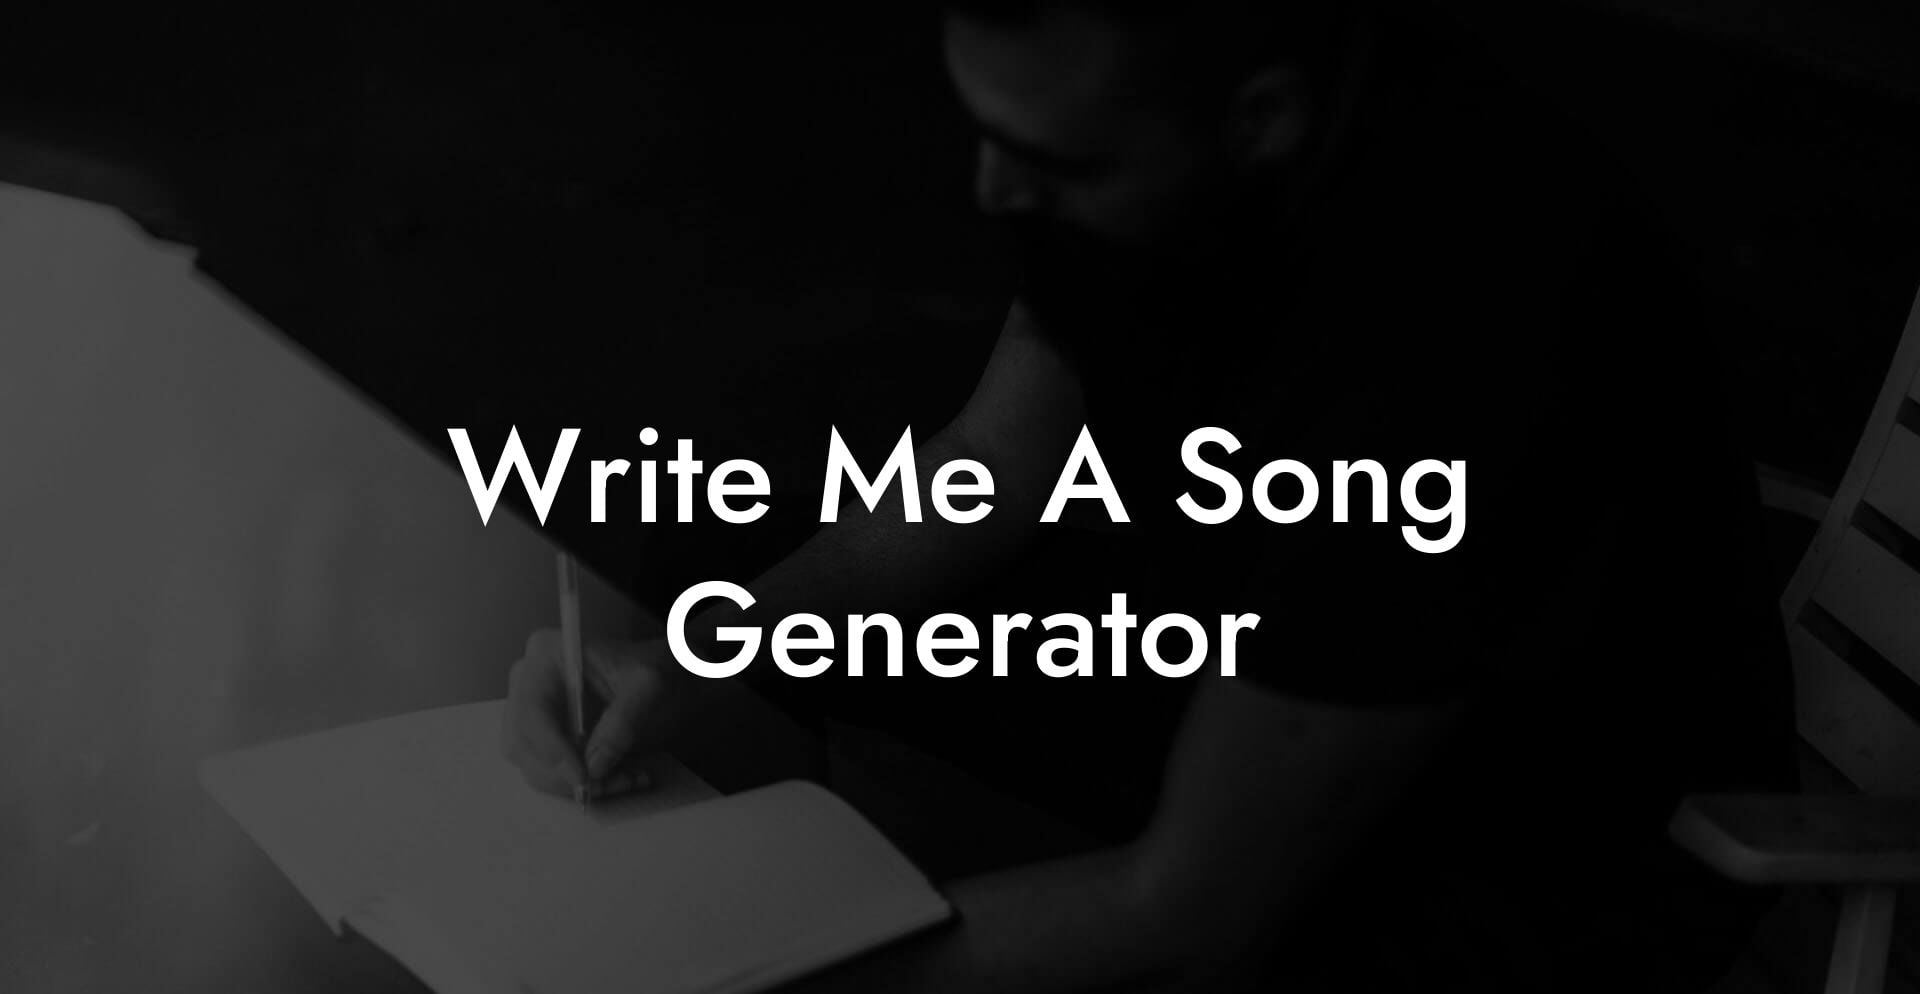 write me a song generator lyric assistant